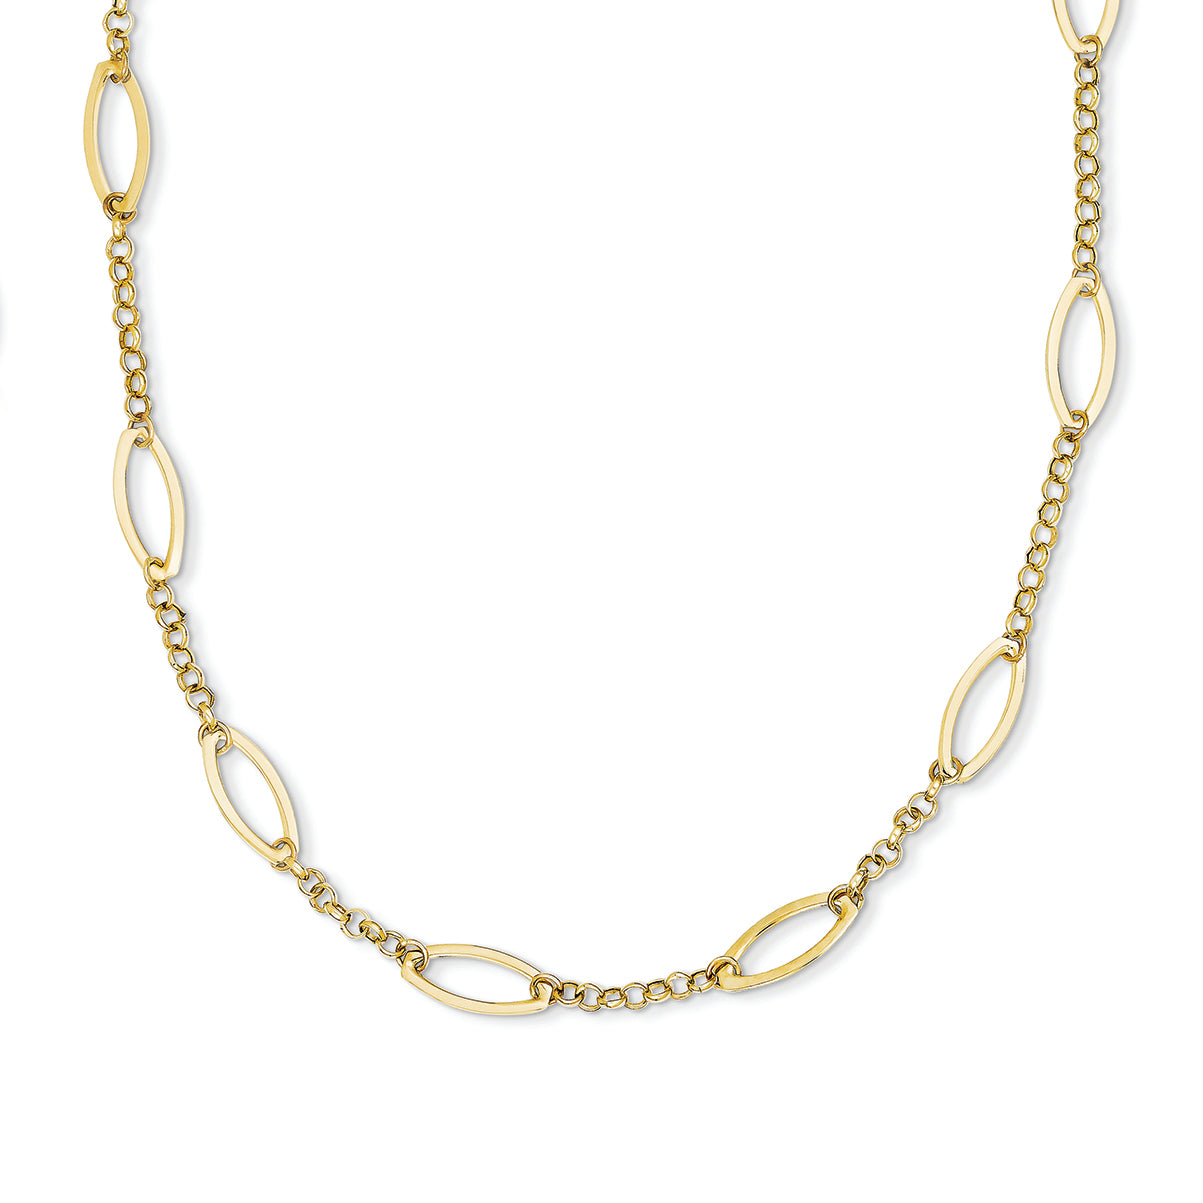 14K Gold Rolo Chain with Oval Links W/ 2in Ext Necklace 18 Inches